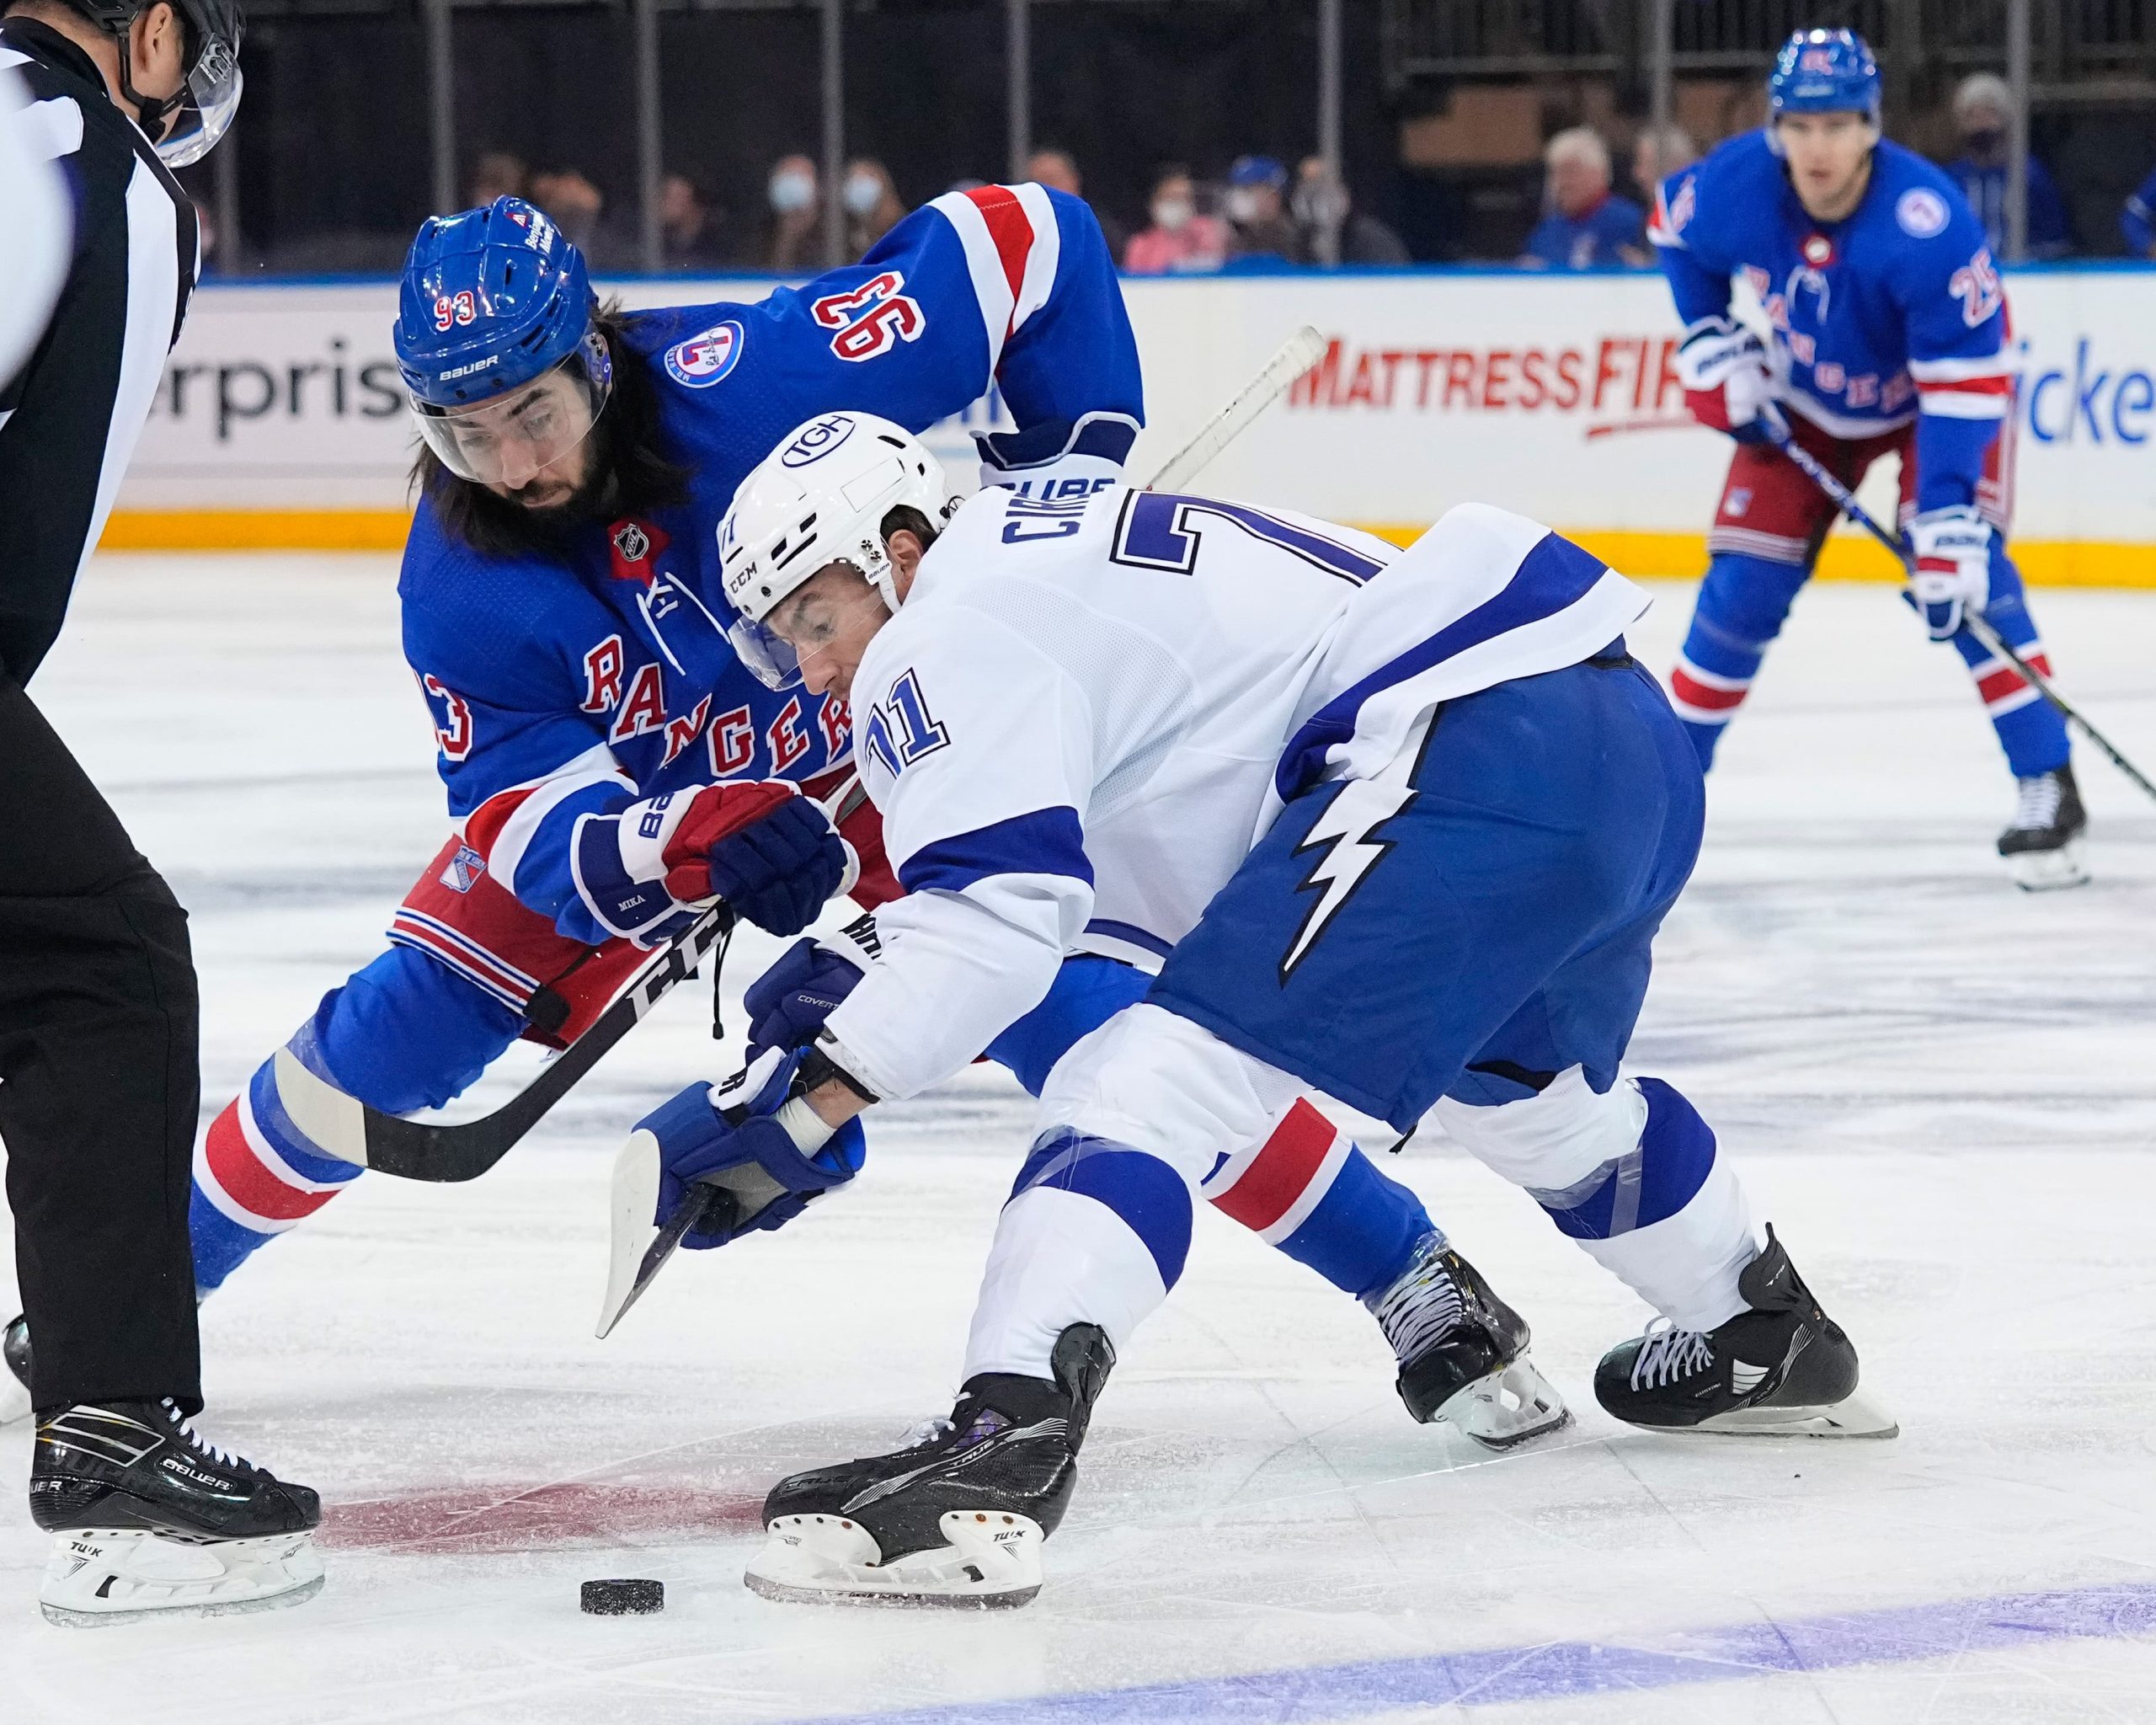 Anthony Cirelli of the Lightning and Mika Zibanejad of the Rangers